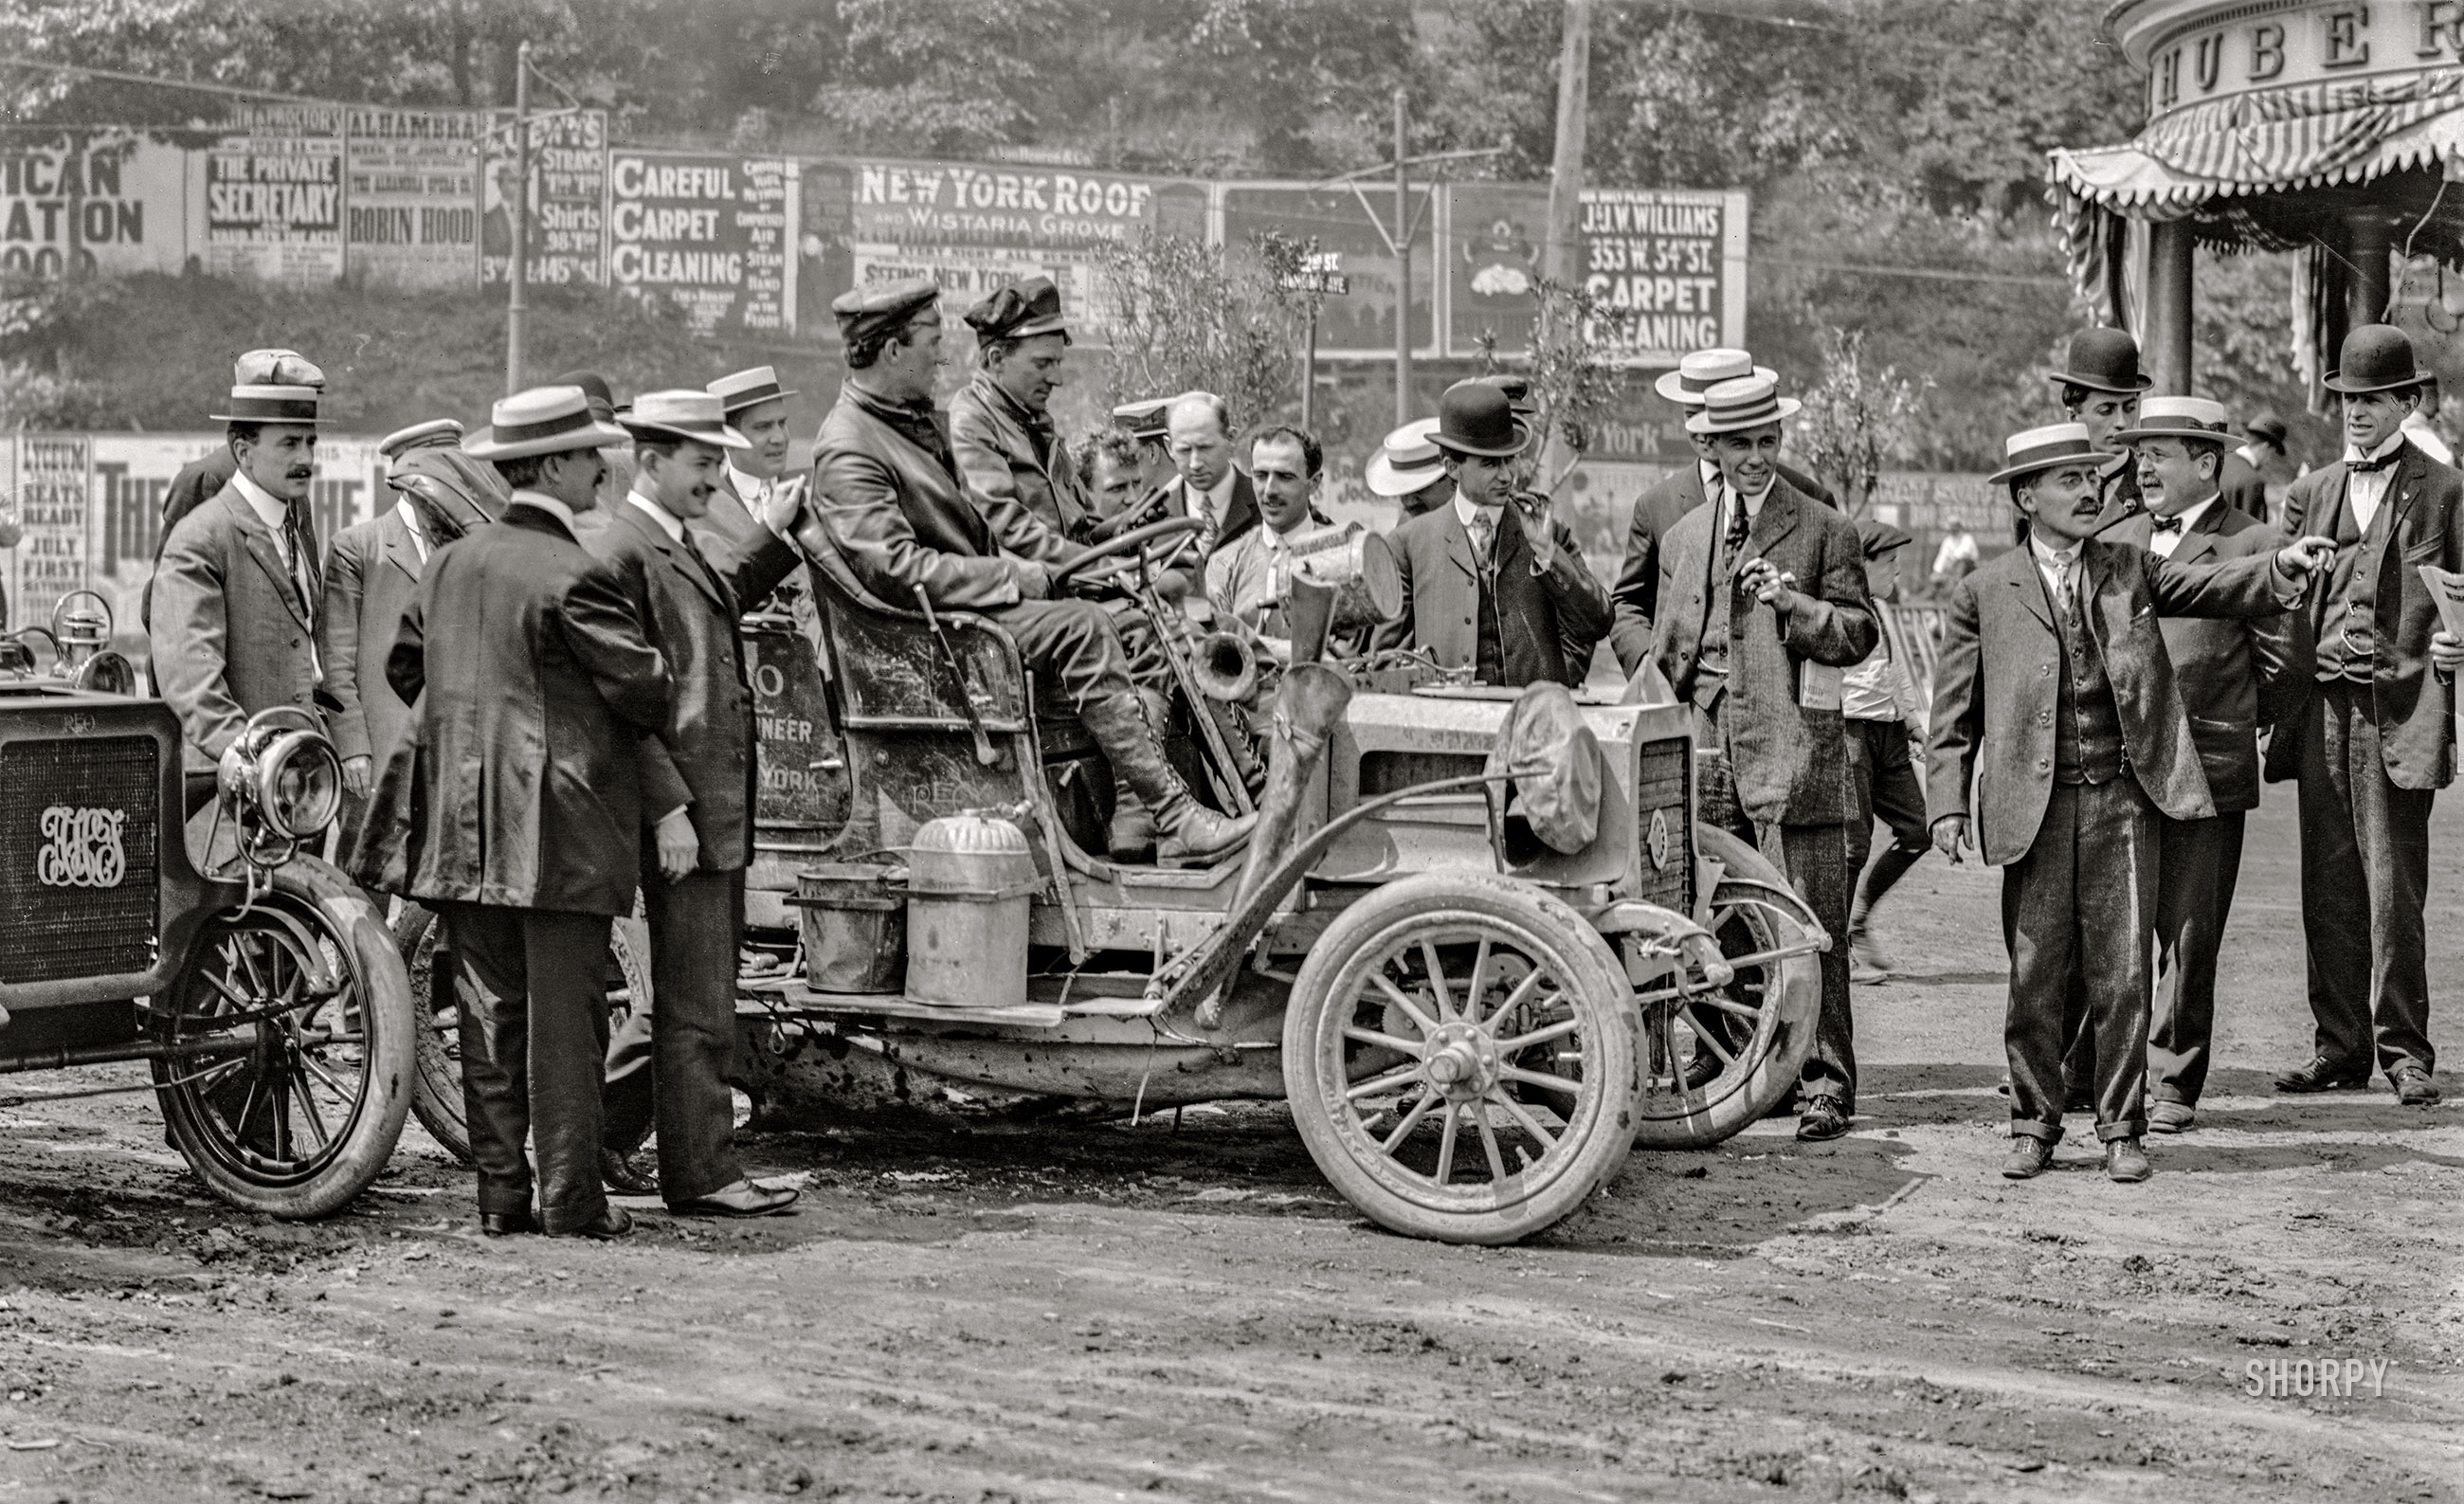 June 1906. "REO Mountaineer, New York to San Francisco and back." Percy Megargel and David Fassett at Huber's Hotel on 162nd Street in the Bronx at the end of their 10-month, 11,000-mile trip in a 16-horsepower REO (Ransom E. Olds) touring car. View full size.